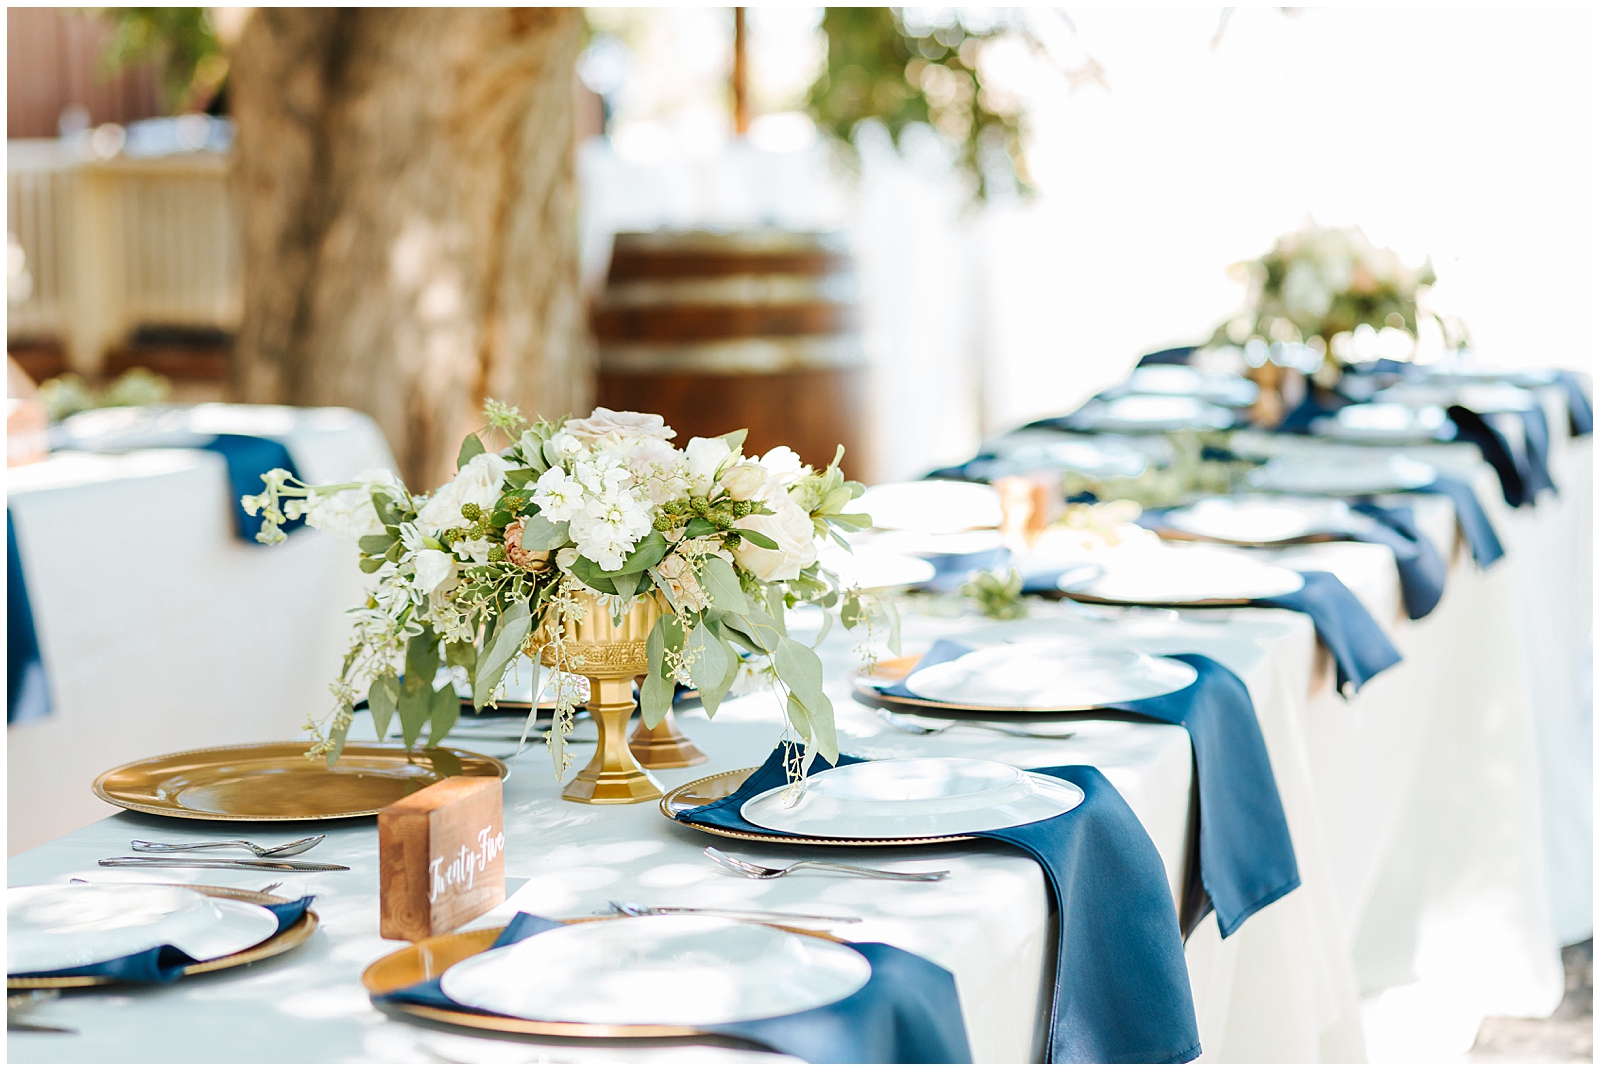 Tablescape with Navy Napkins, Gold Chargers, and Beautiful Floral Pieces